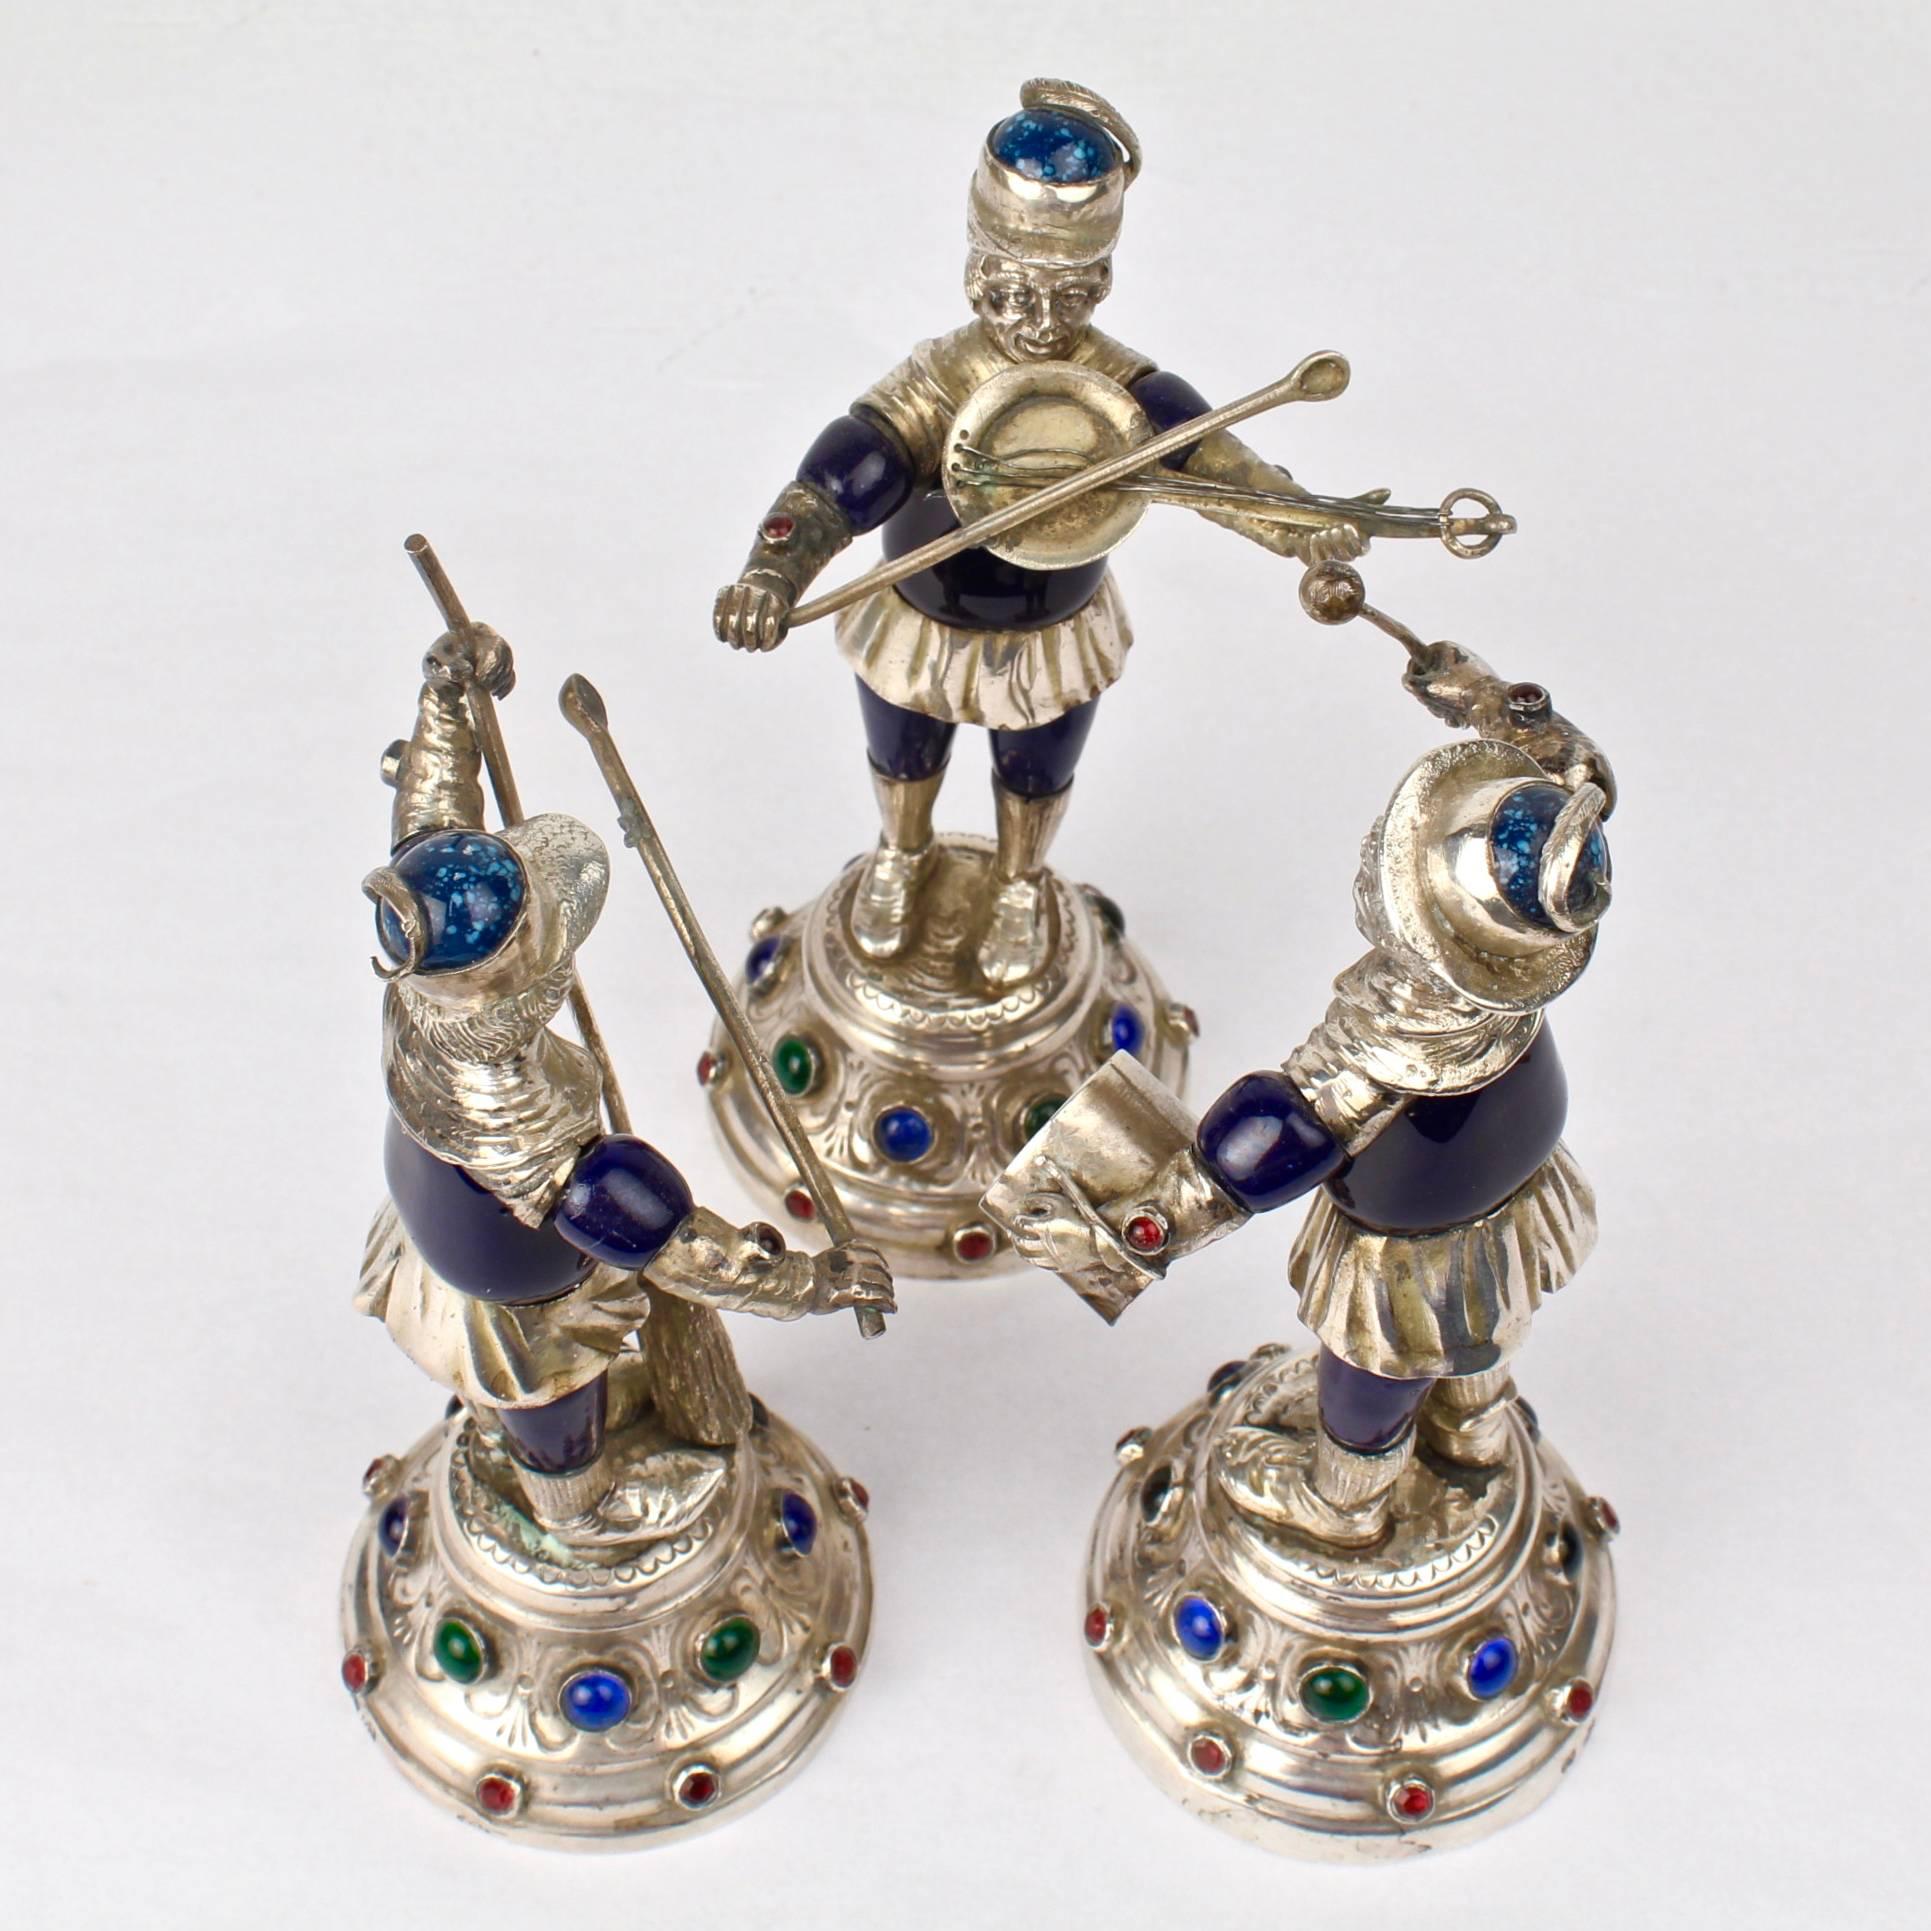 Three 19th Century Jeweled & Enameled German Coin Silver Musician Figurines For Sale 2